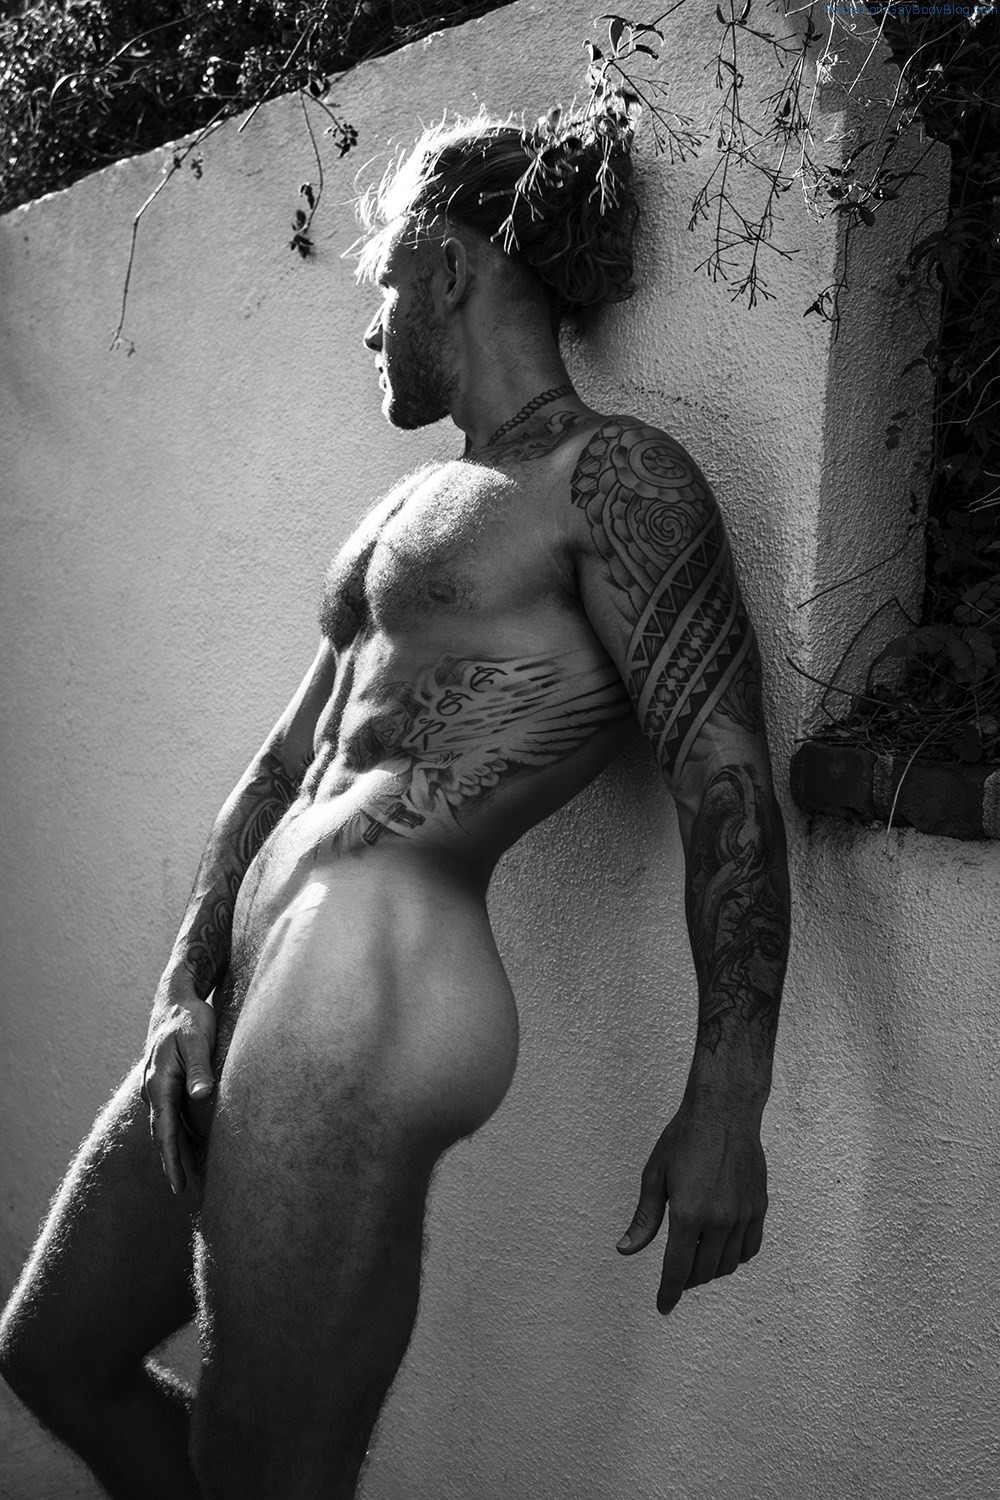 Handsome Vince Ramos Has A Lovely Ass - Gay Body Blog - Pics of Male Models...